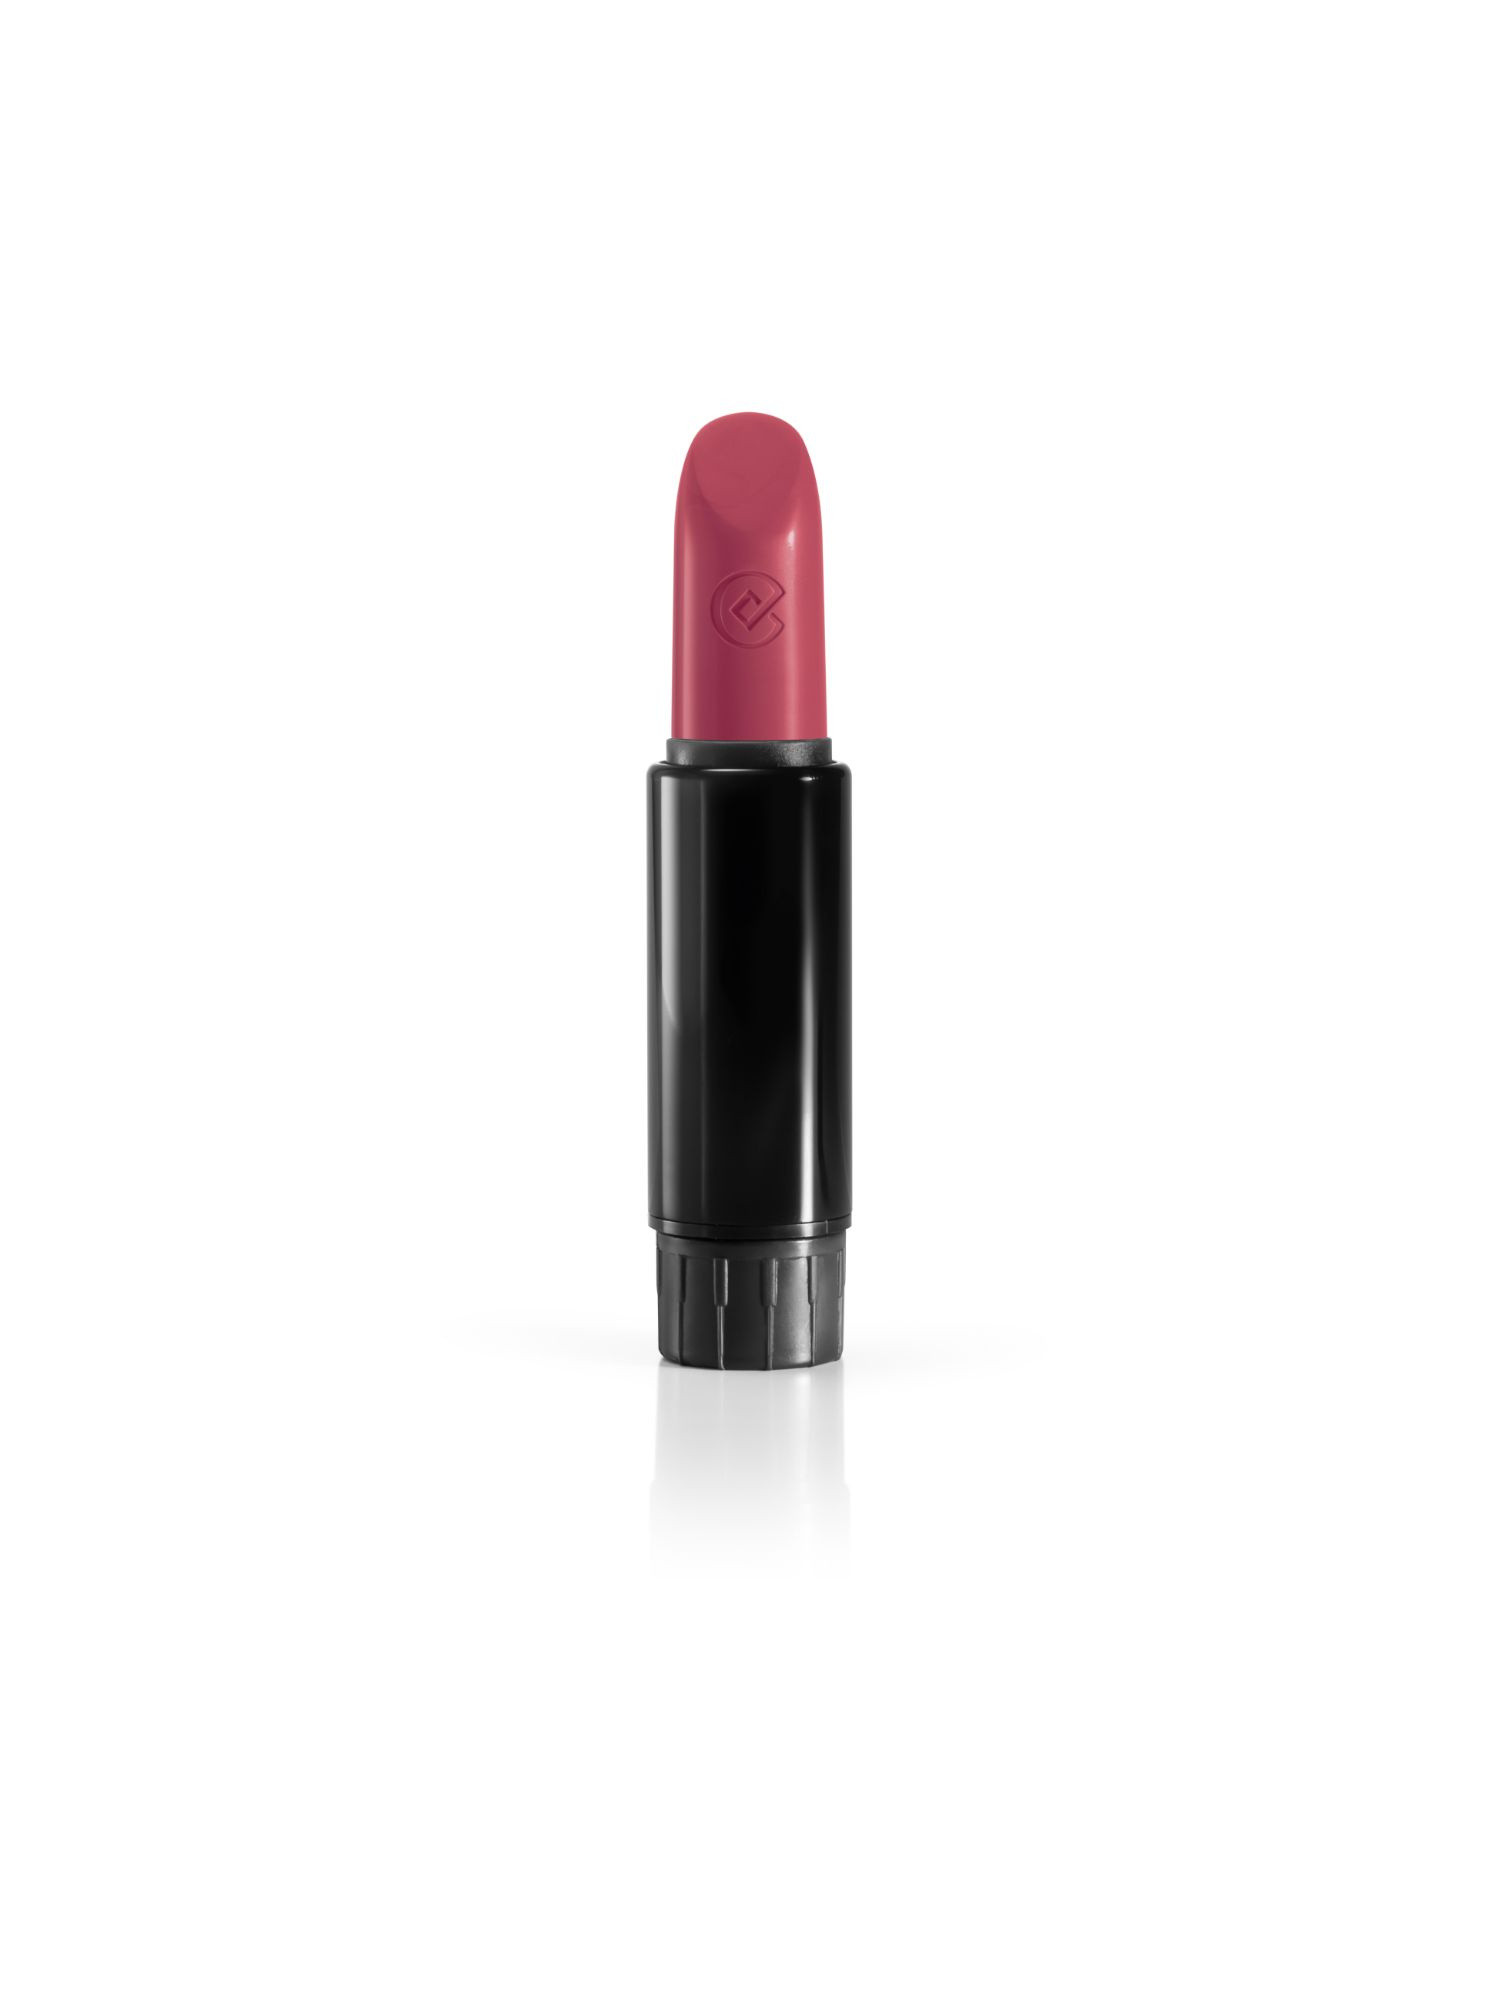 Pure lipstick refill - 113 Autumn berry, Natural, large image number 0